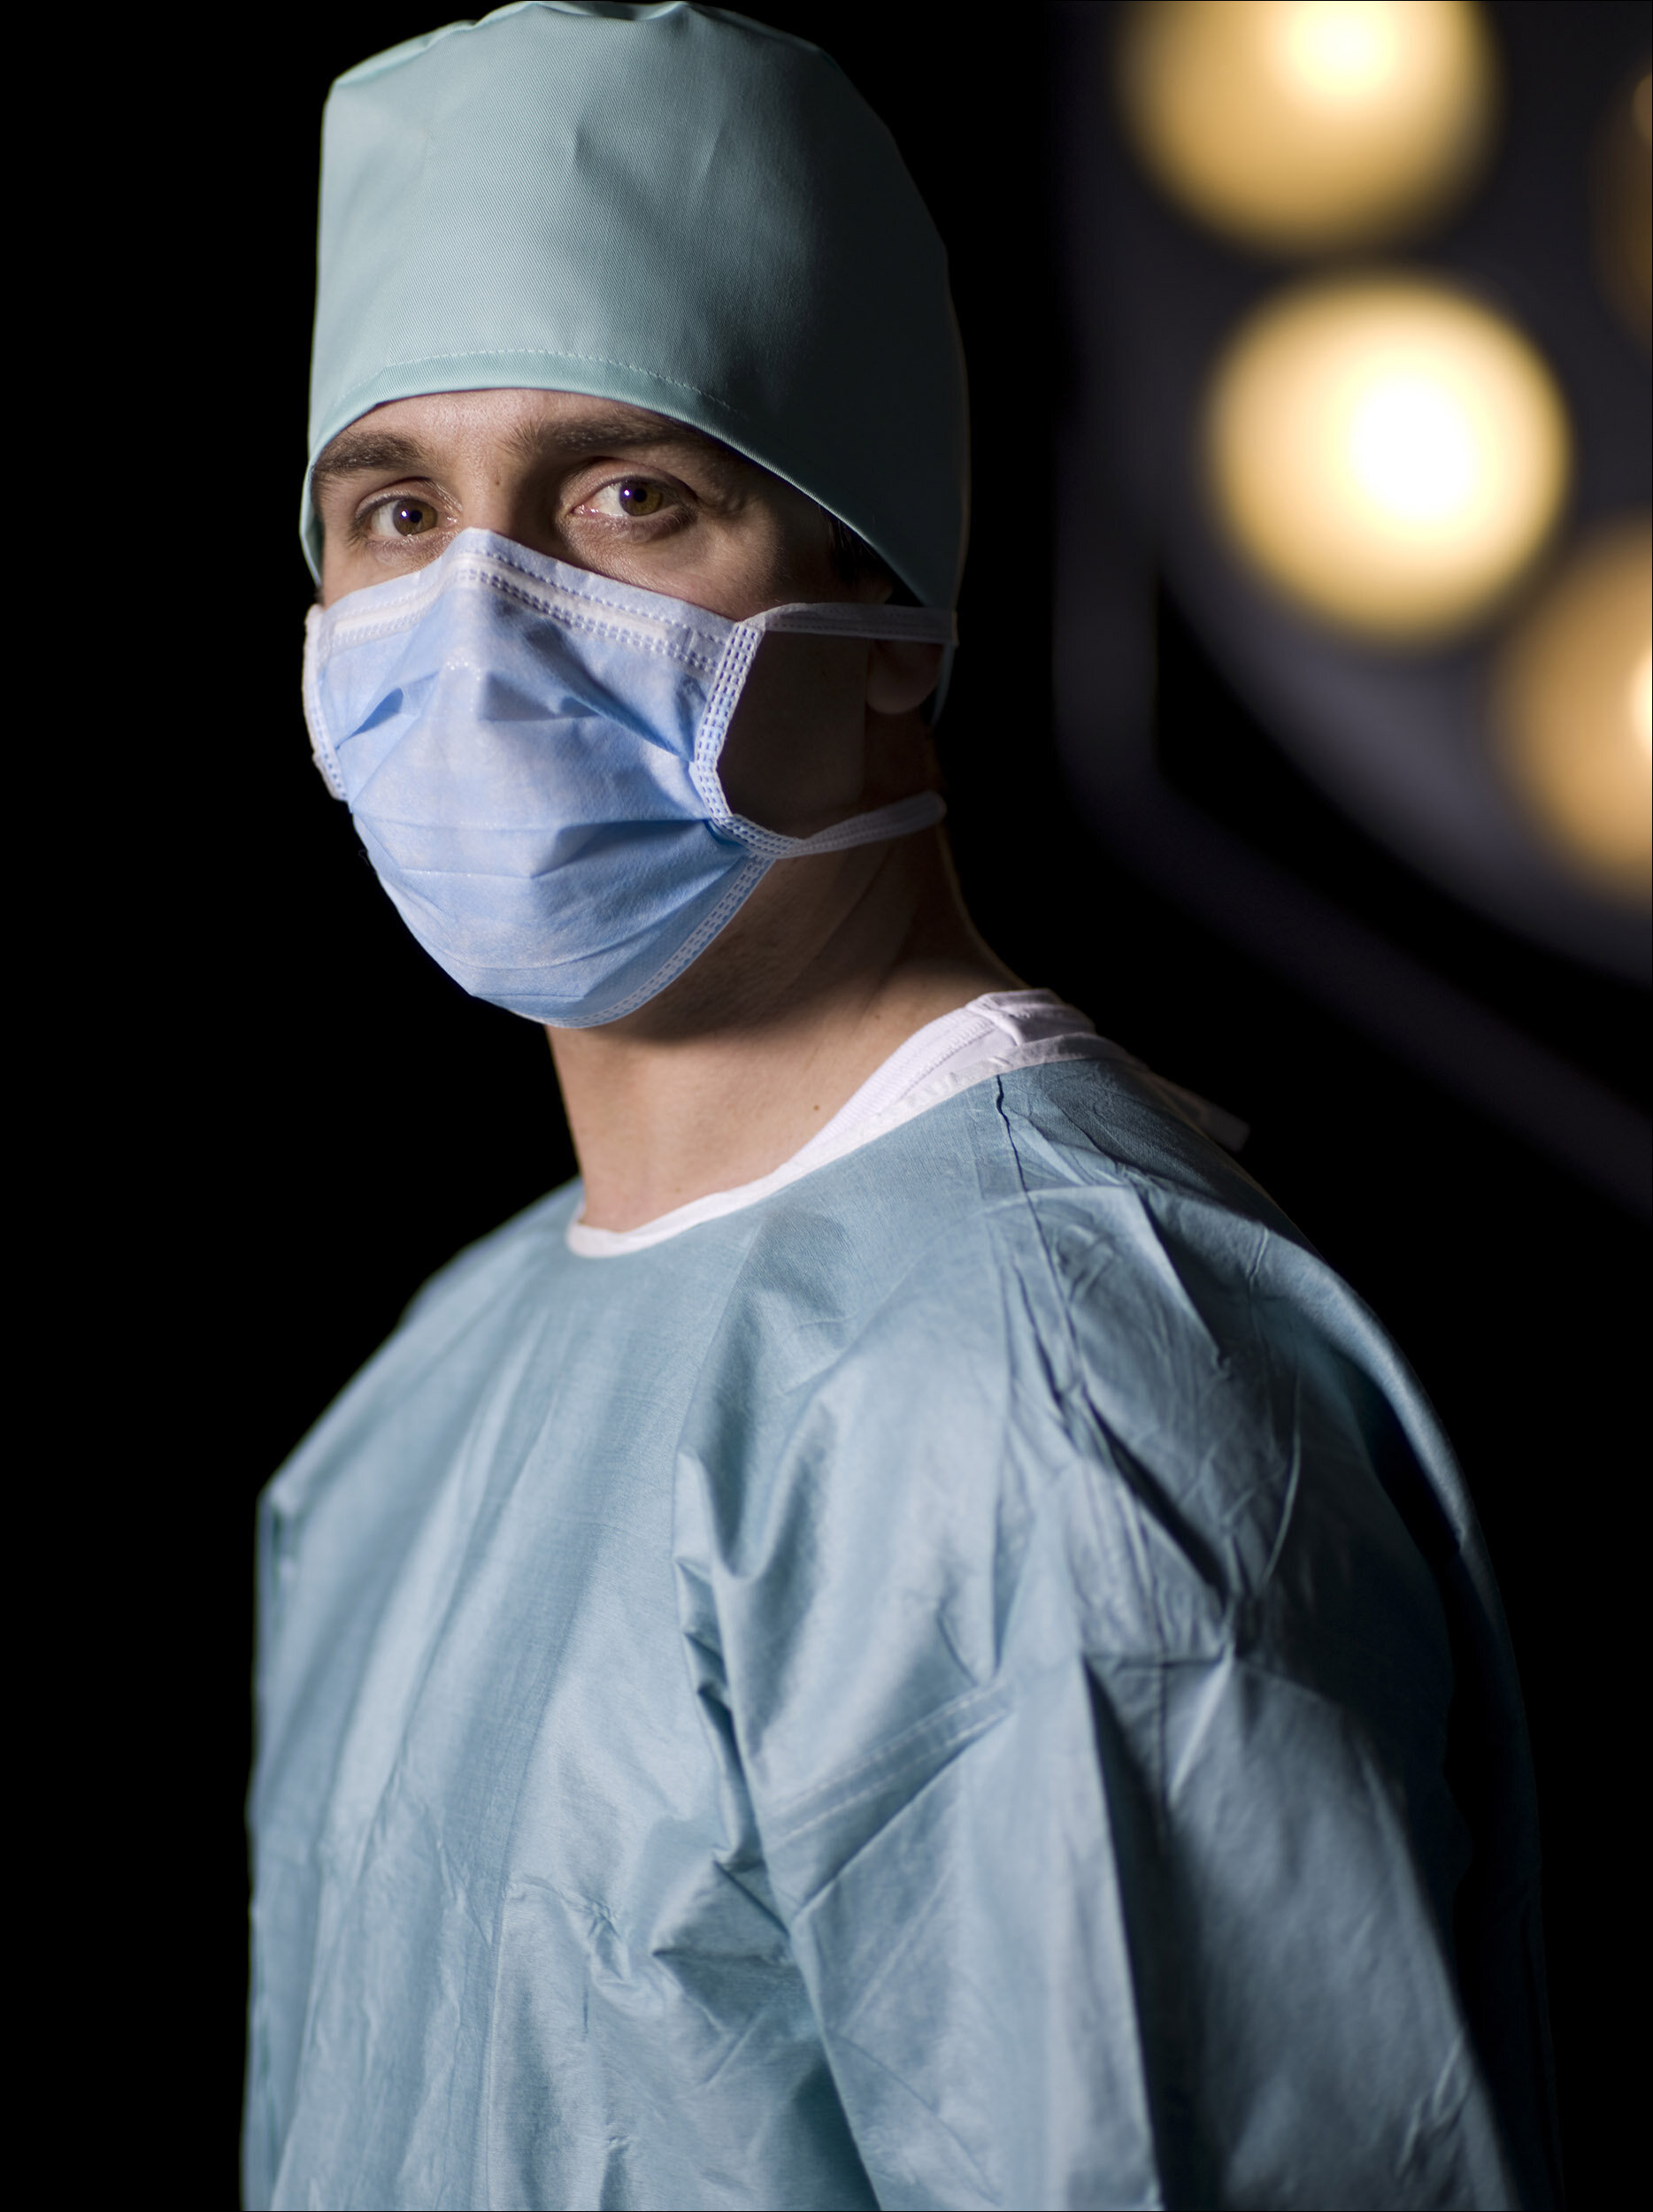 Portrait of a surgeon in mask and gown with operating light in the background